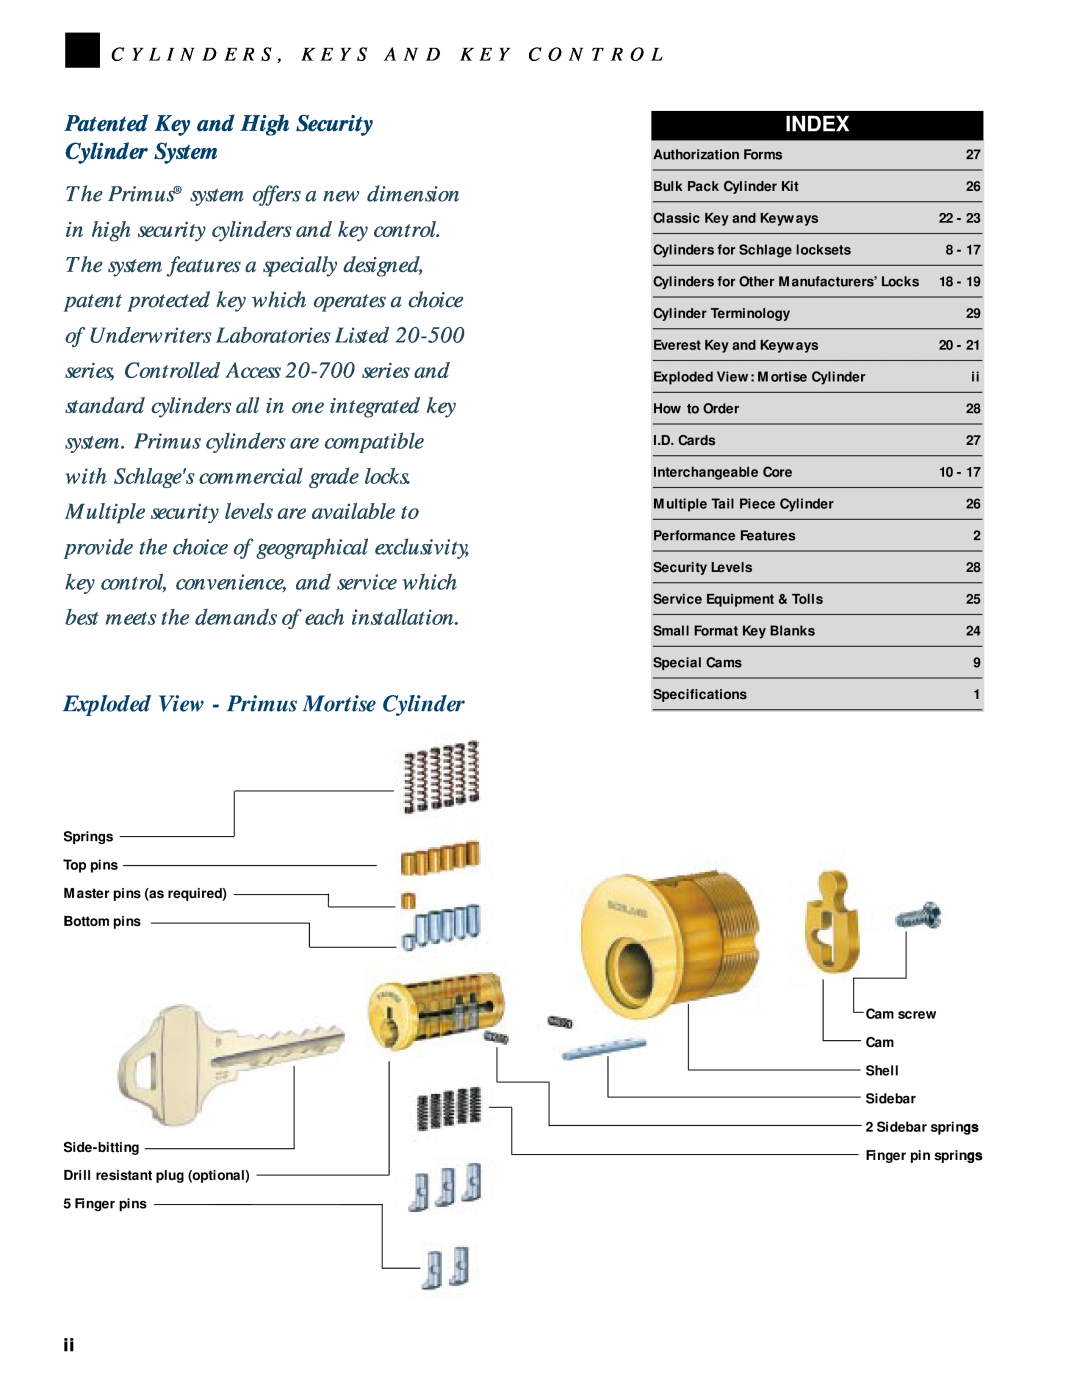 Schlage CYLINDERS manual Patented Key and High Security Cylinder System, Exploded View - Primus Mortise Cylinder, Index 